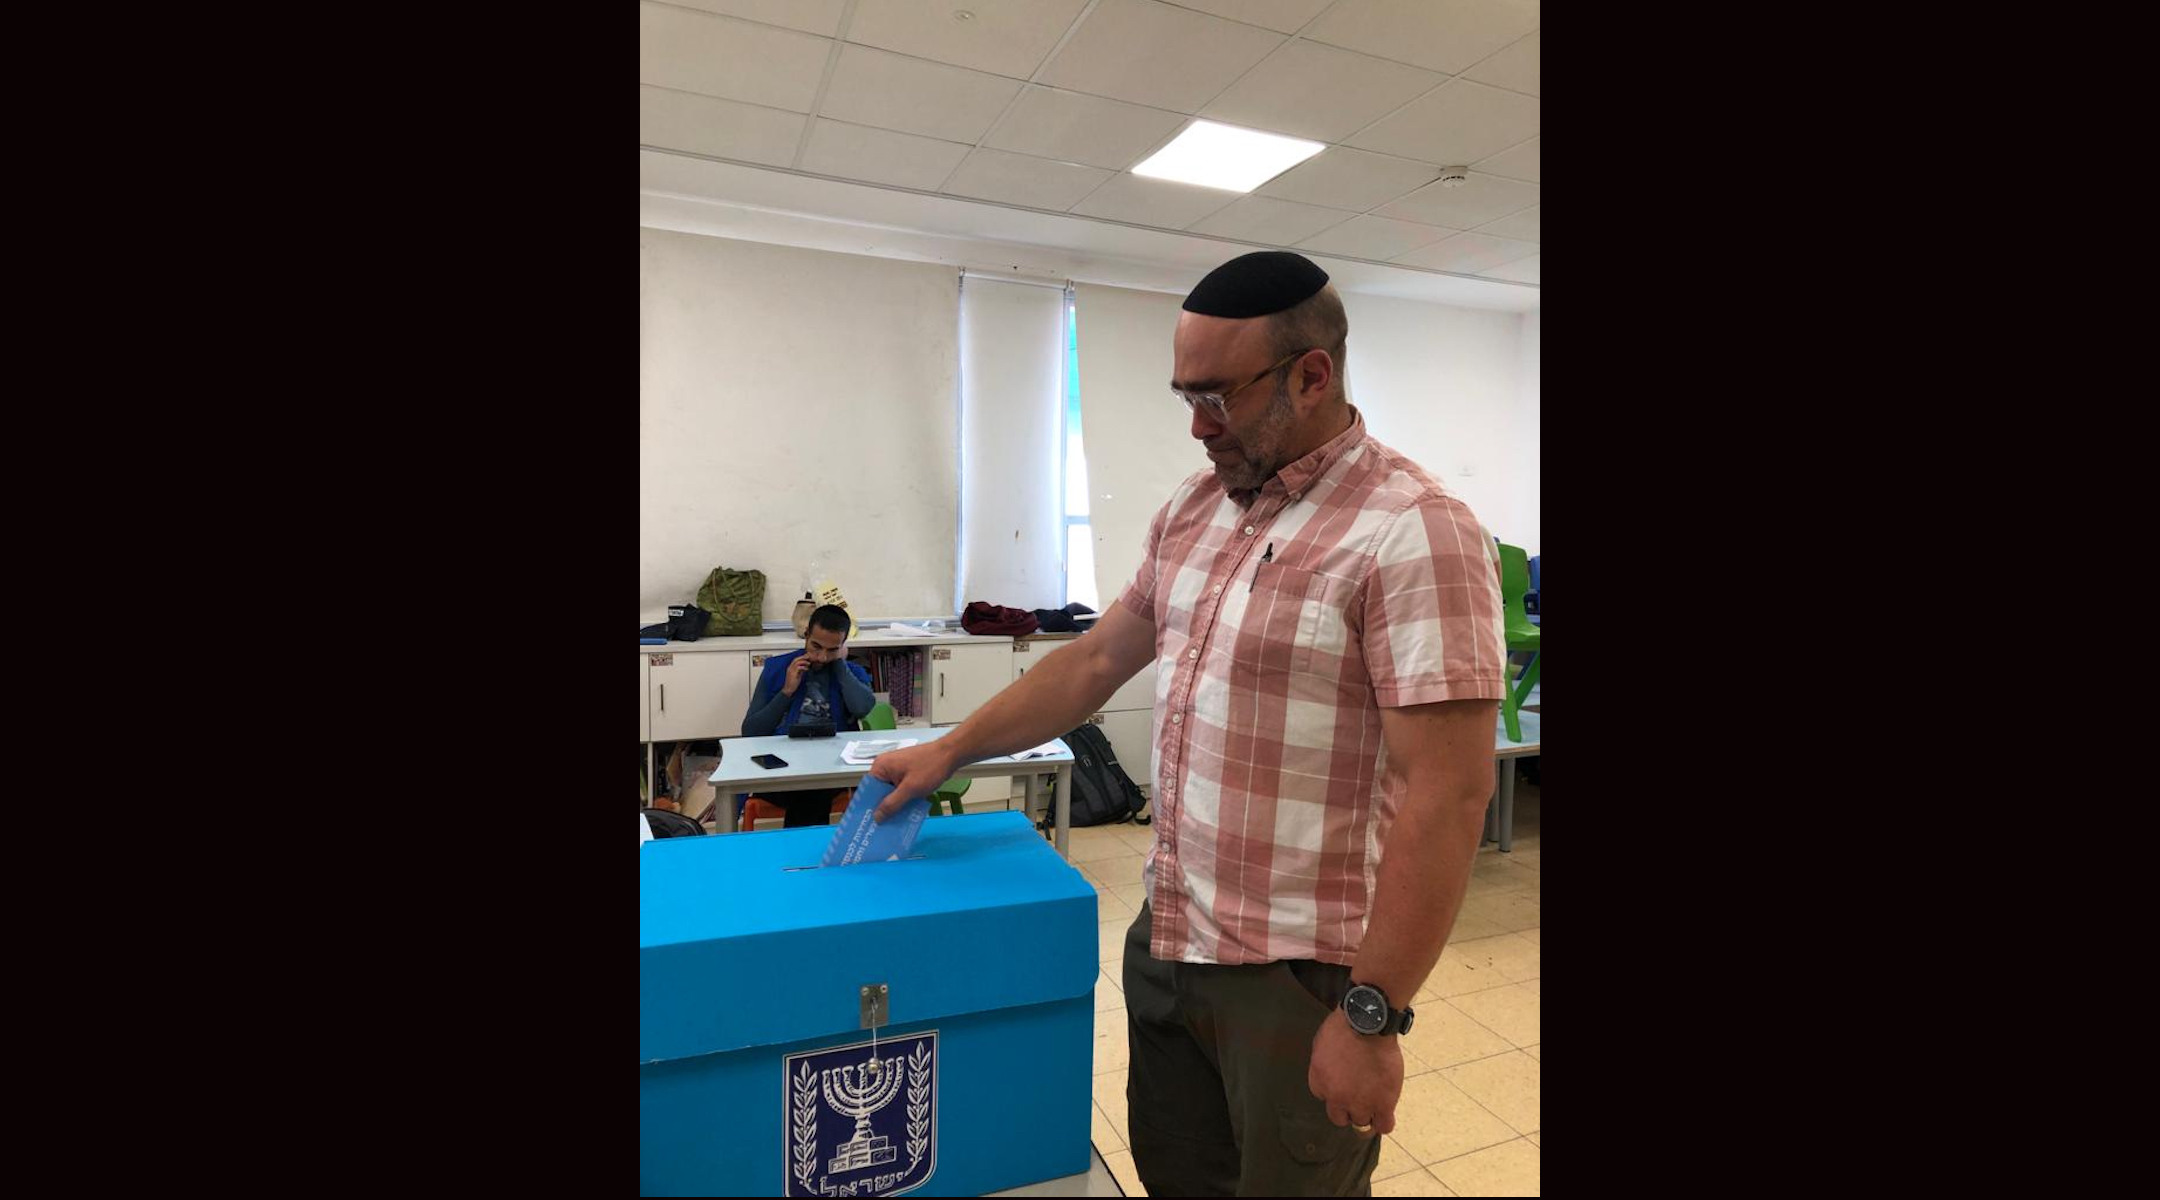 Ari Hoffman, who moved to Israel from the United States in 2021, votes in Israel’s election, Nov. 1, 2022. (Courtesy of Hoffman)